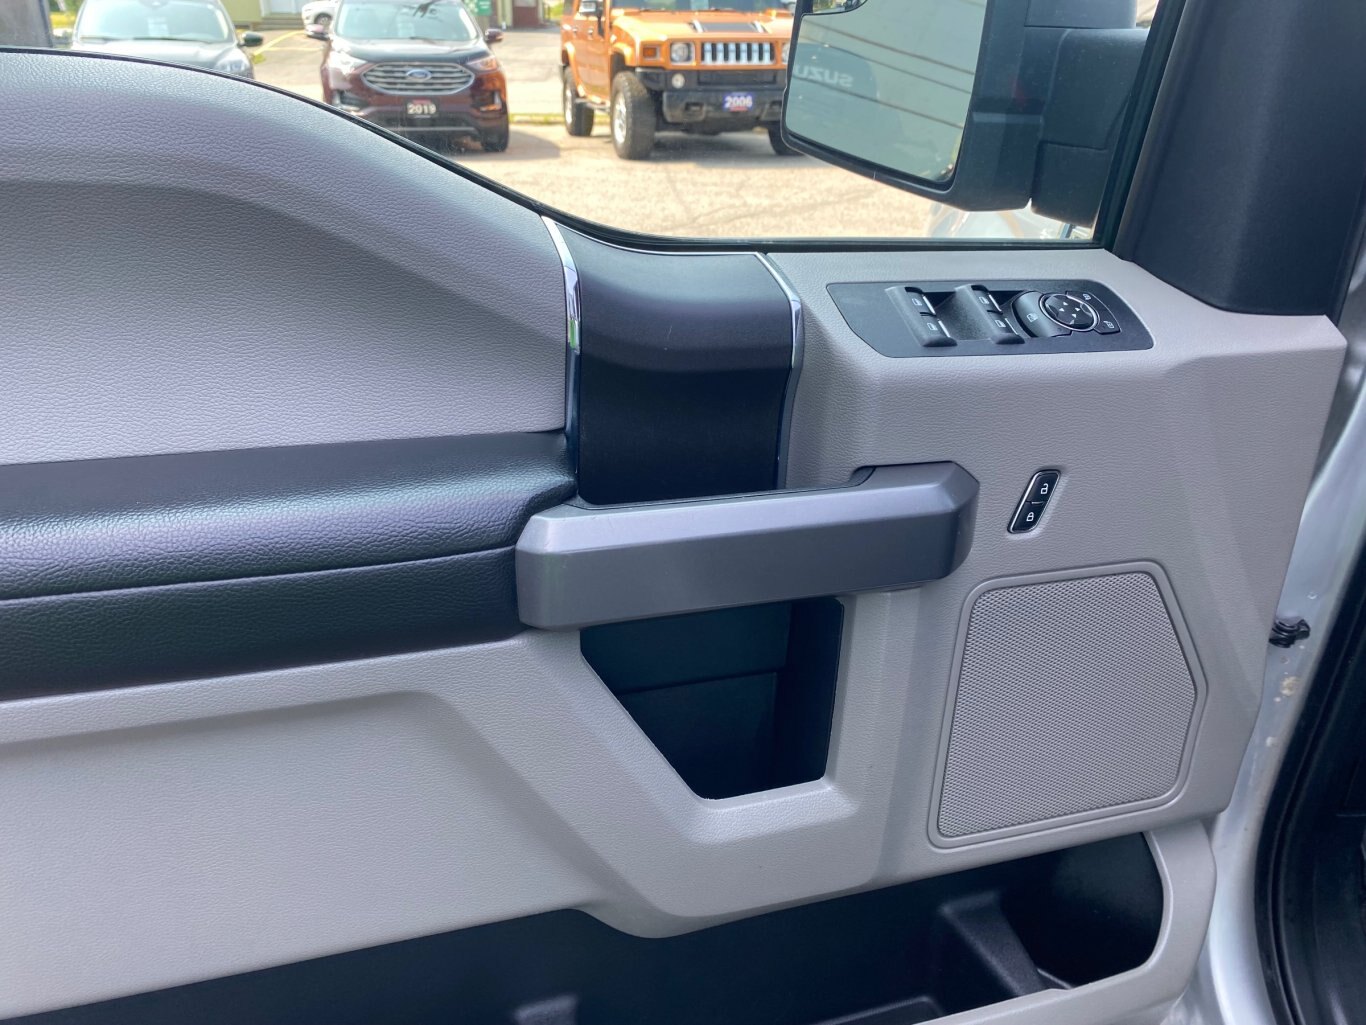 2019 FORD F 150 XLT 4X4 SUPERCREW WITH REAR VIEW CAMERA!! ( PREVIOUS RENTAL )